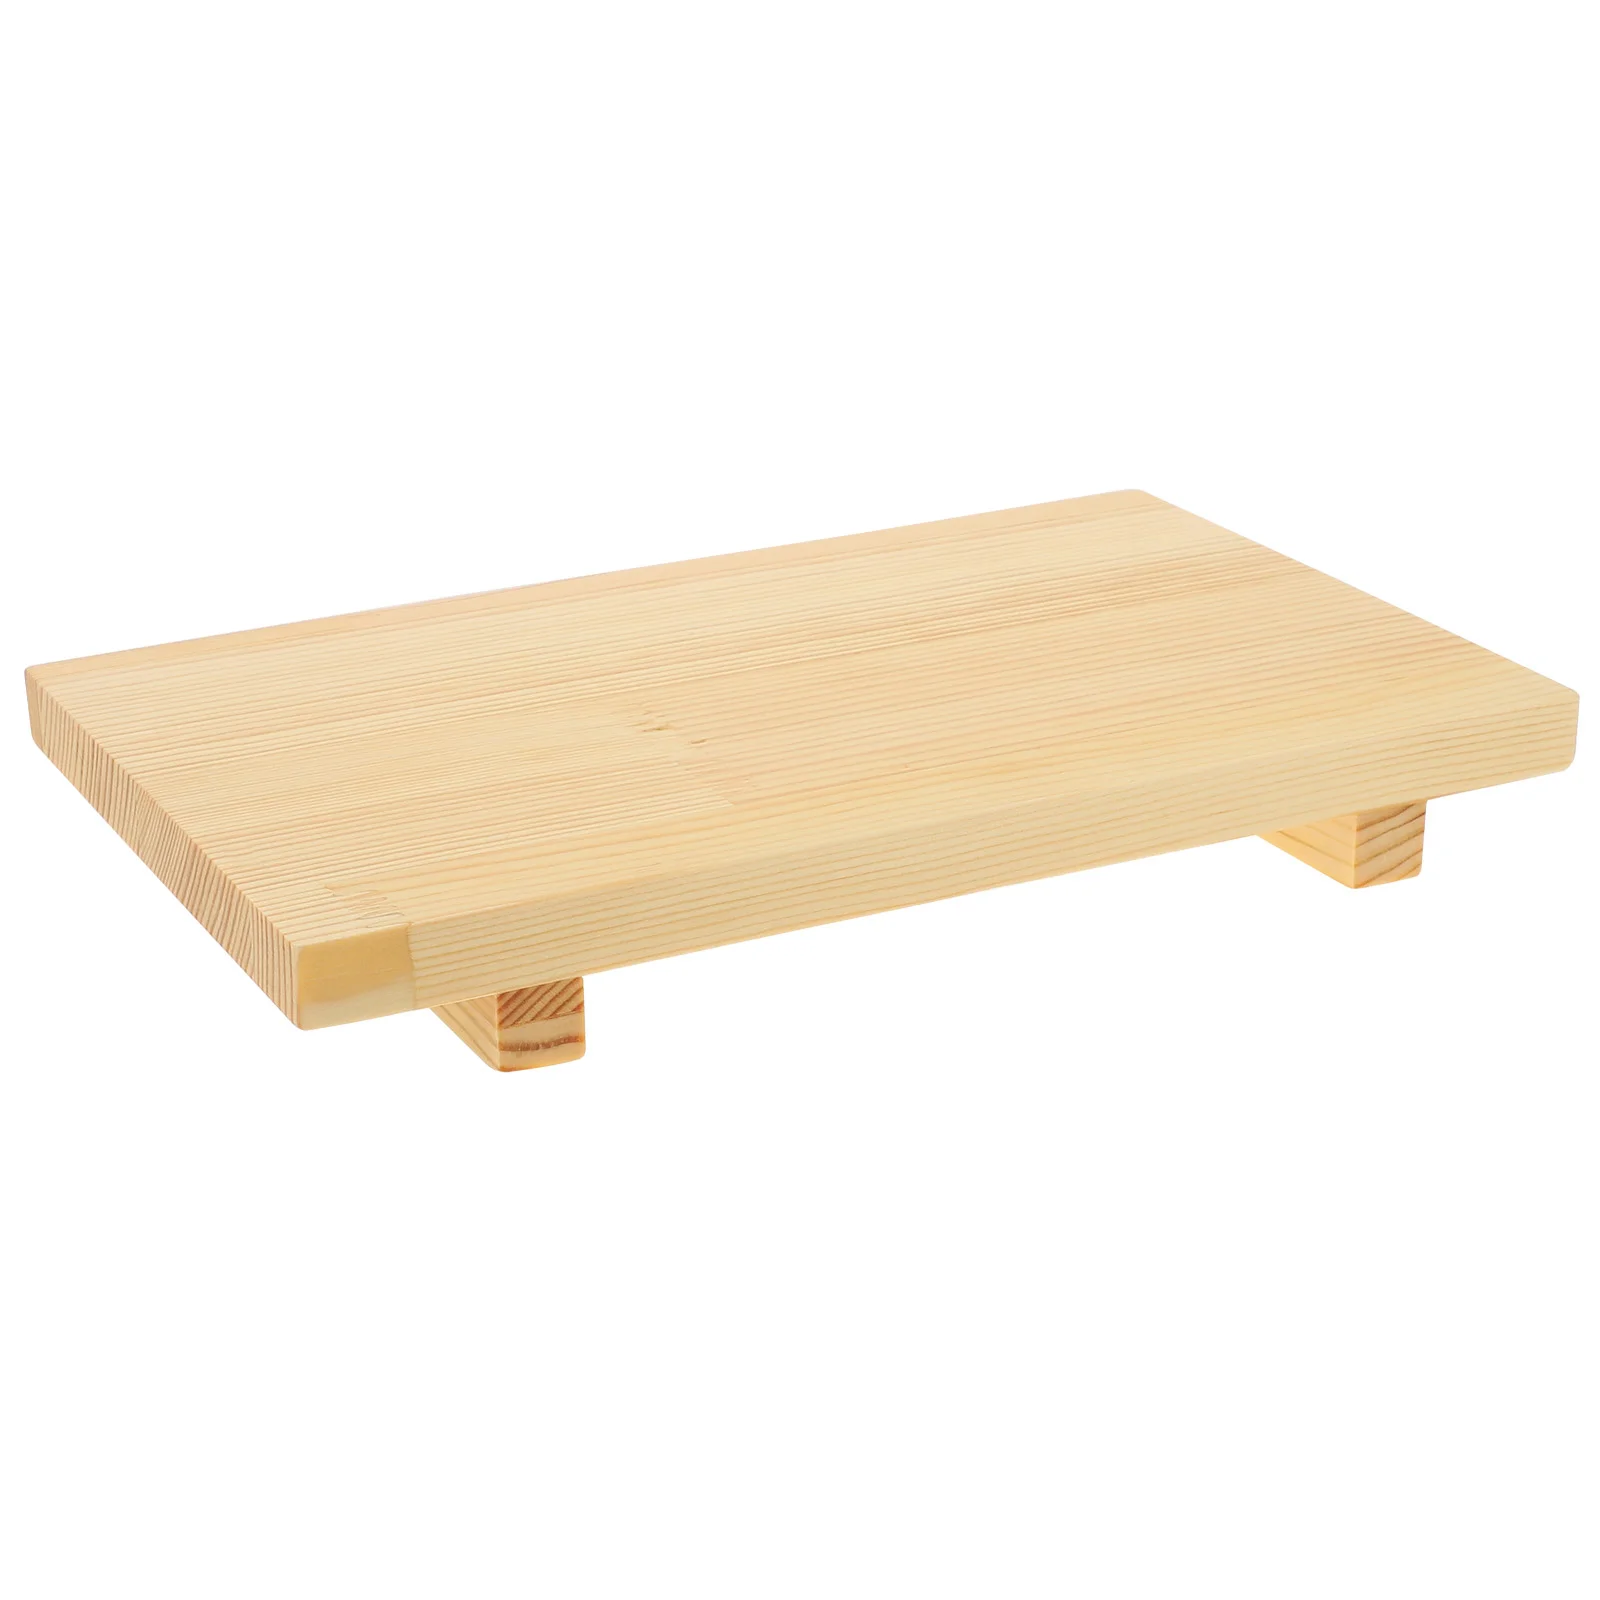 

Sushi Plate Serving Tray Board Platter Plates Sashimi Japanese Woodgetawooden Cheese Boat Holder Party Tableware Desserts